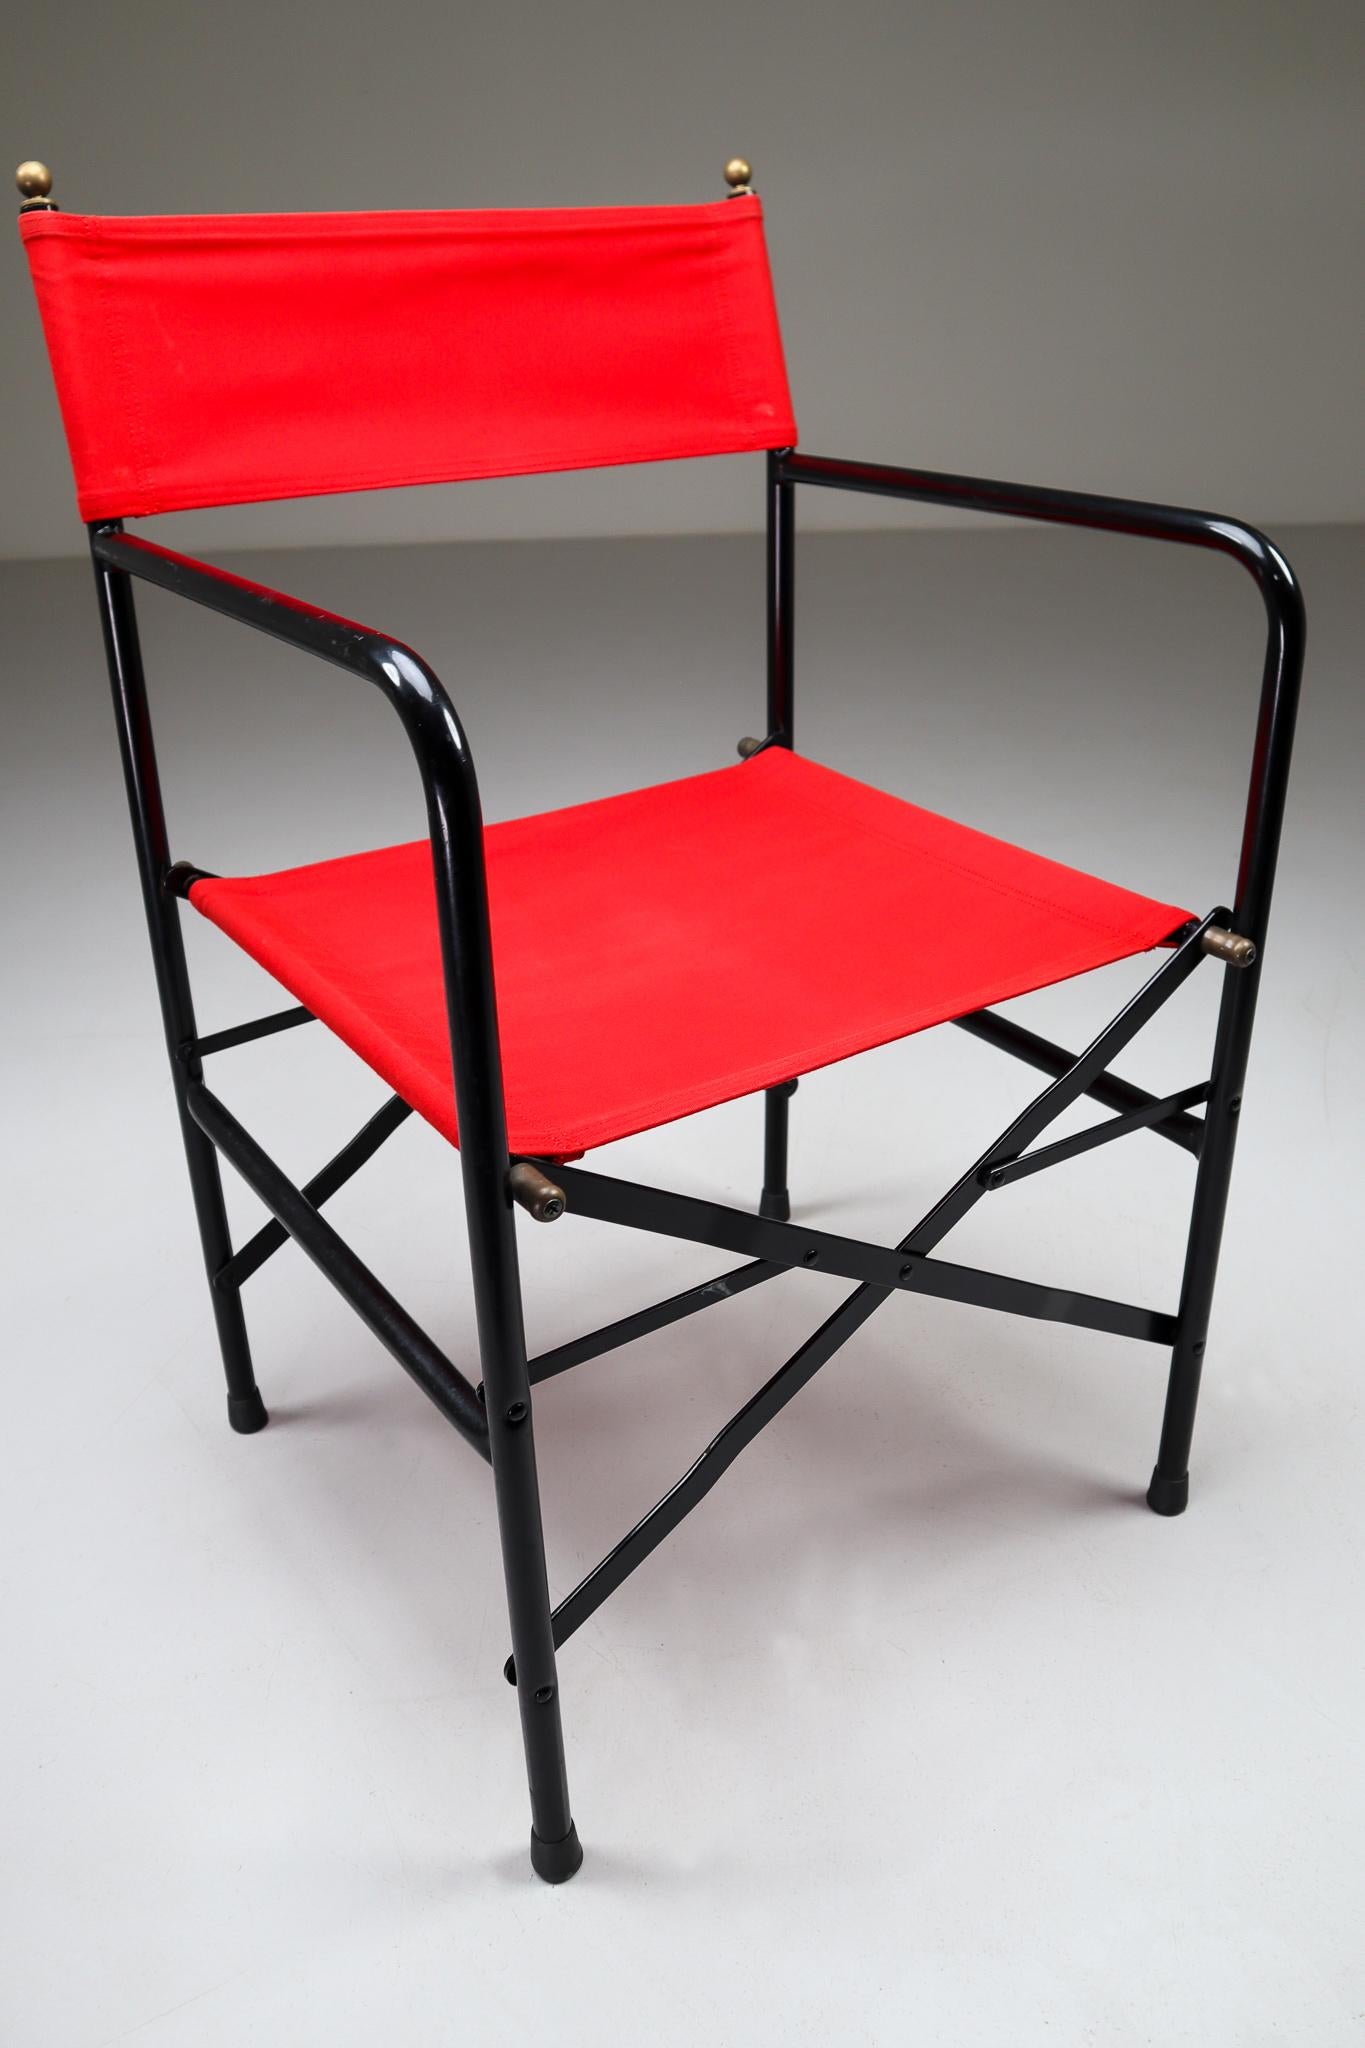 Set from 18 Venetian folding-patio-garden chairs designed and produced in Italy during the 1980s. The chairs are made from red strong fabric for the seat and backrest. The frame is made of black lacquered steel with brass details. They are